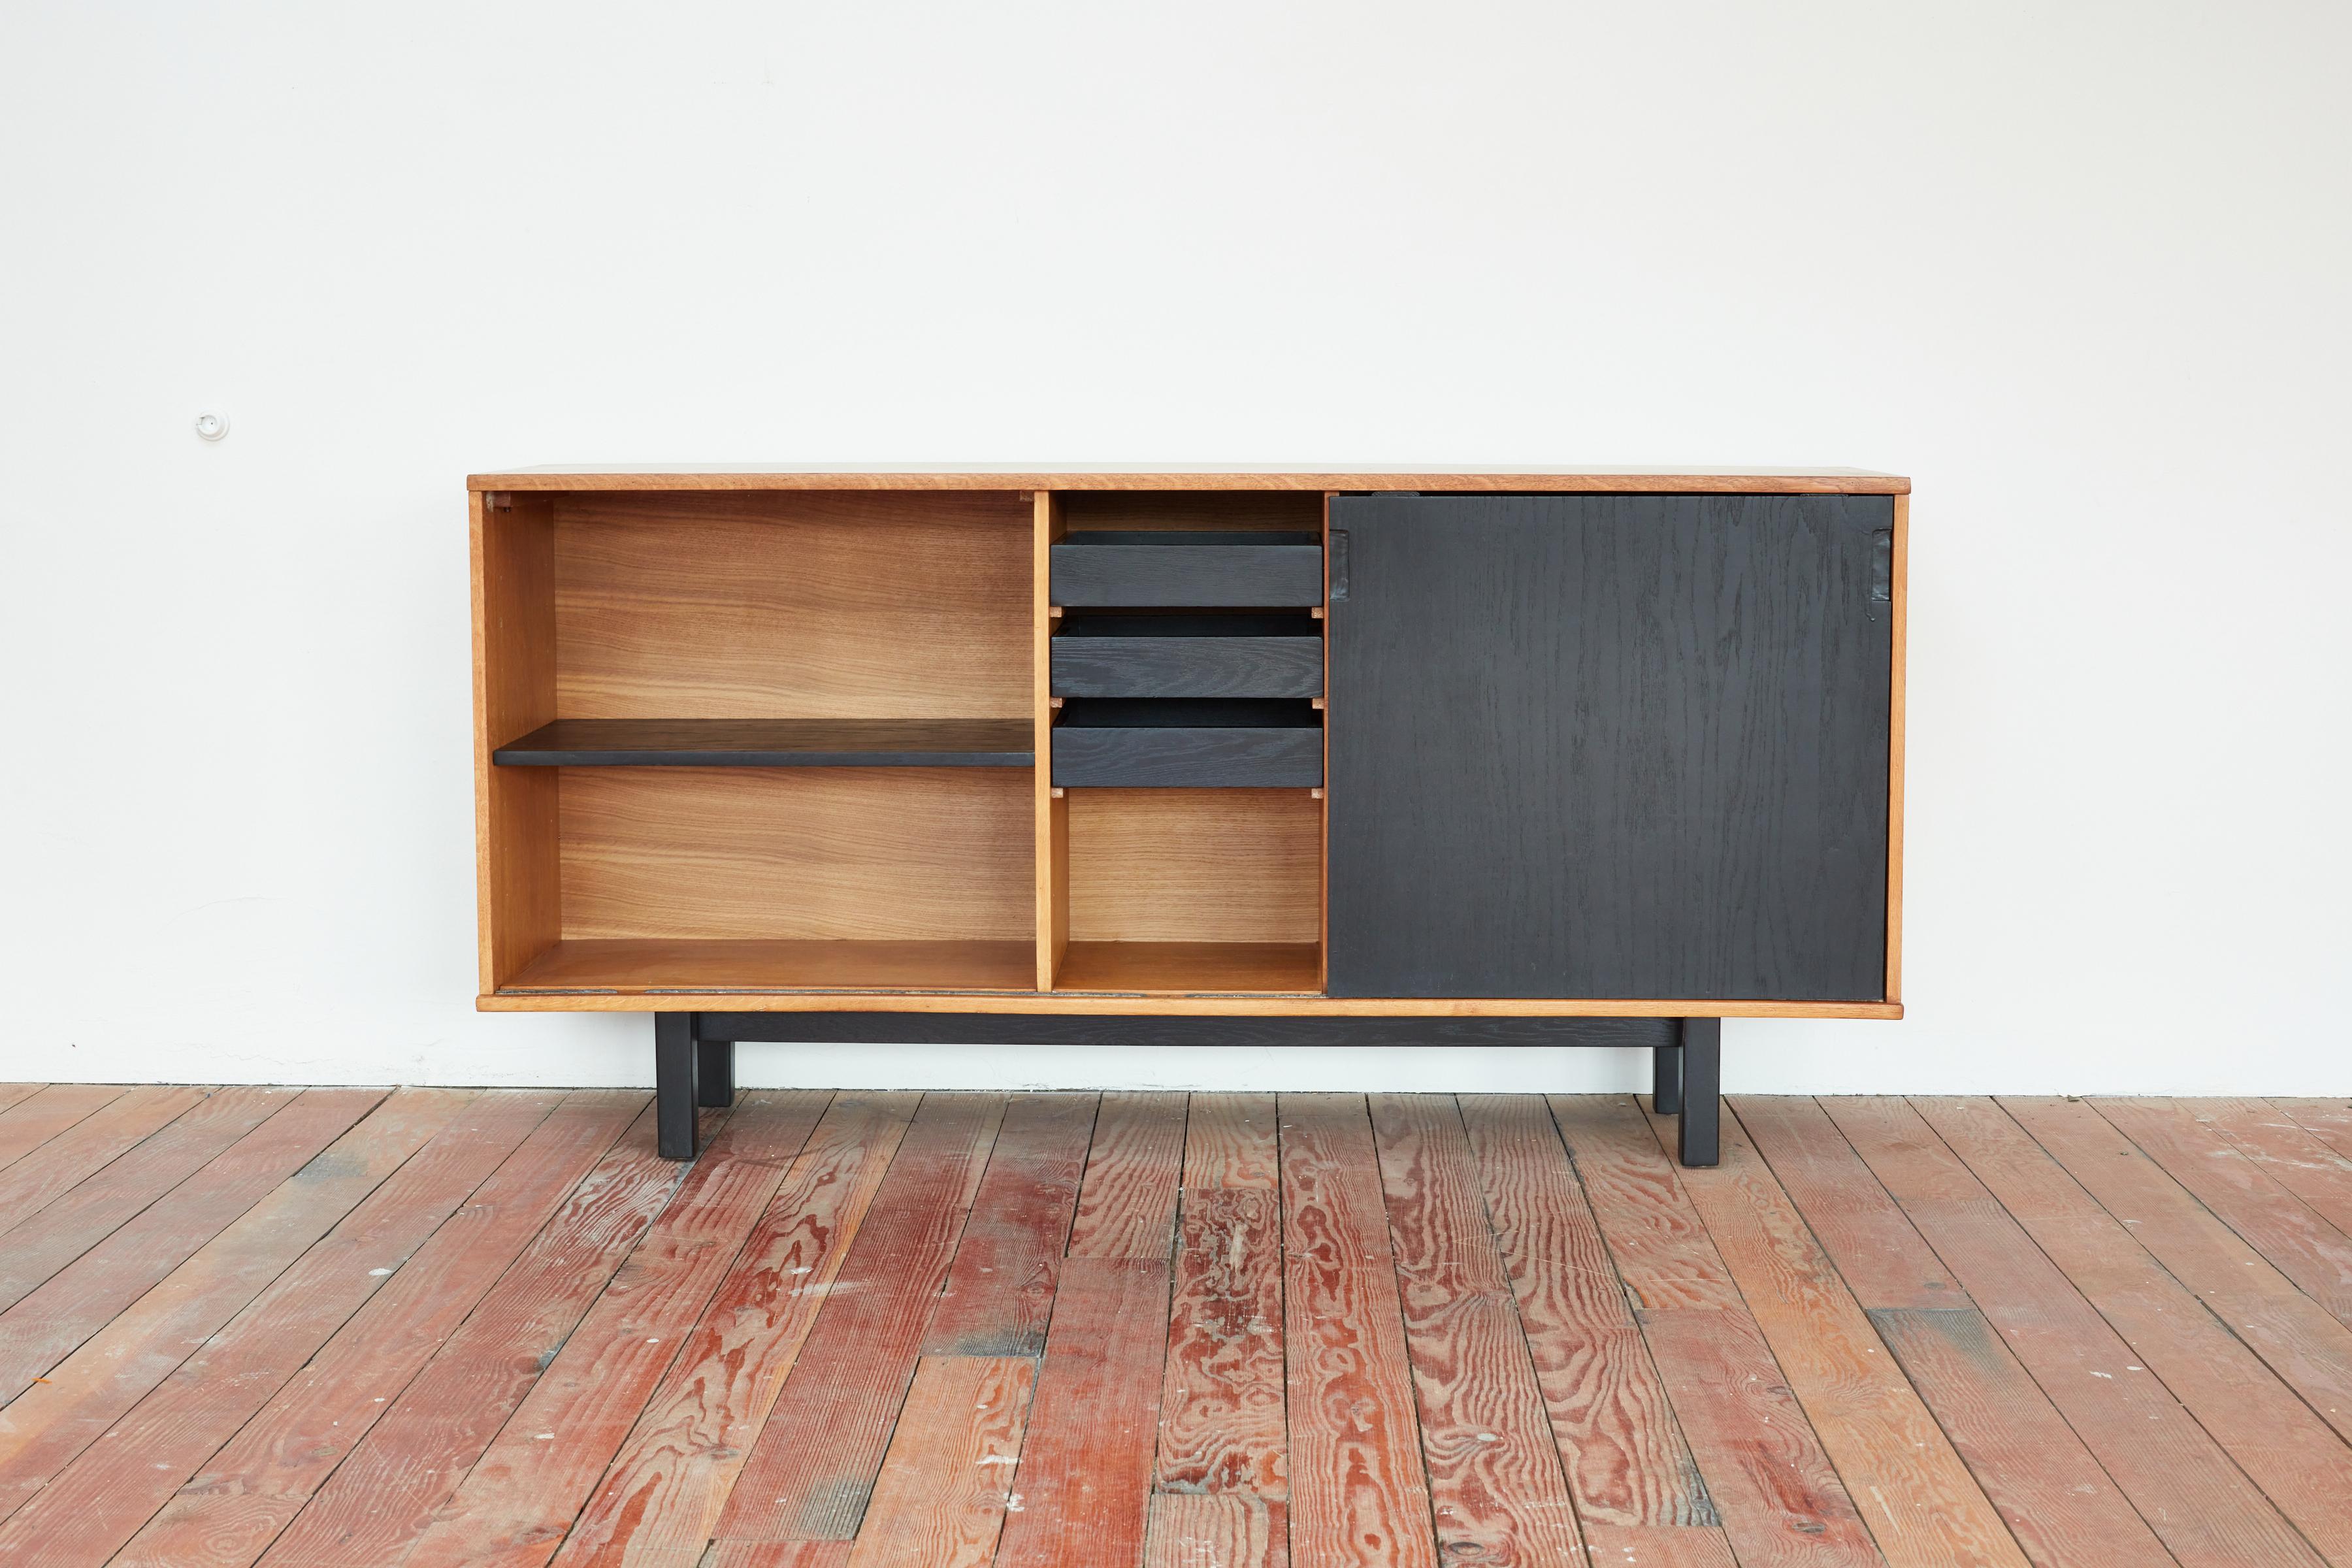 Oak and black sideboard by Jean Domps, circa 1950s.
Created for the 